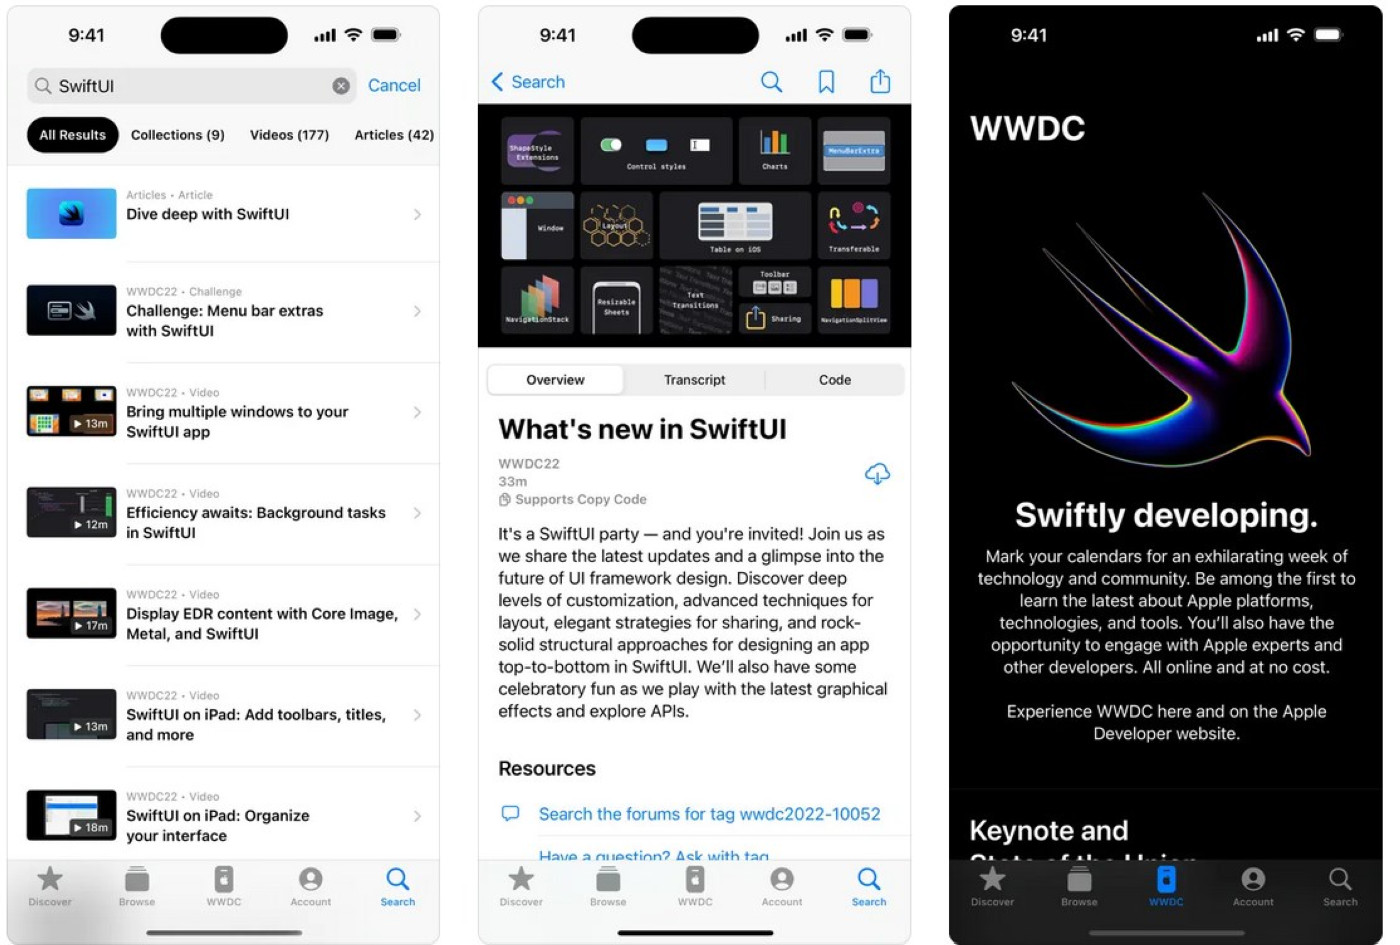 Apple Developer App Updates for WWDC 2023: Keynote, Sessions and More